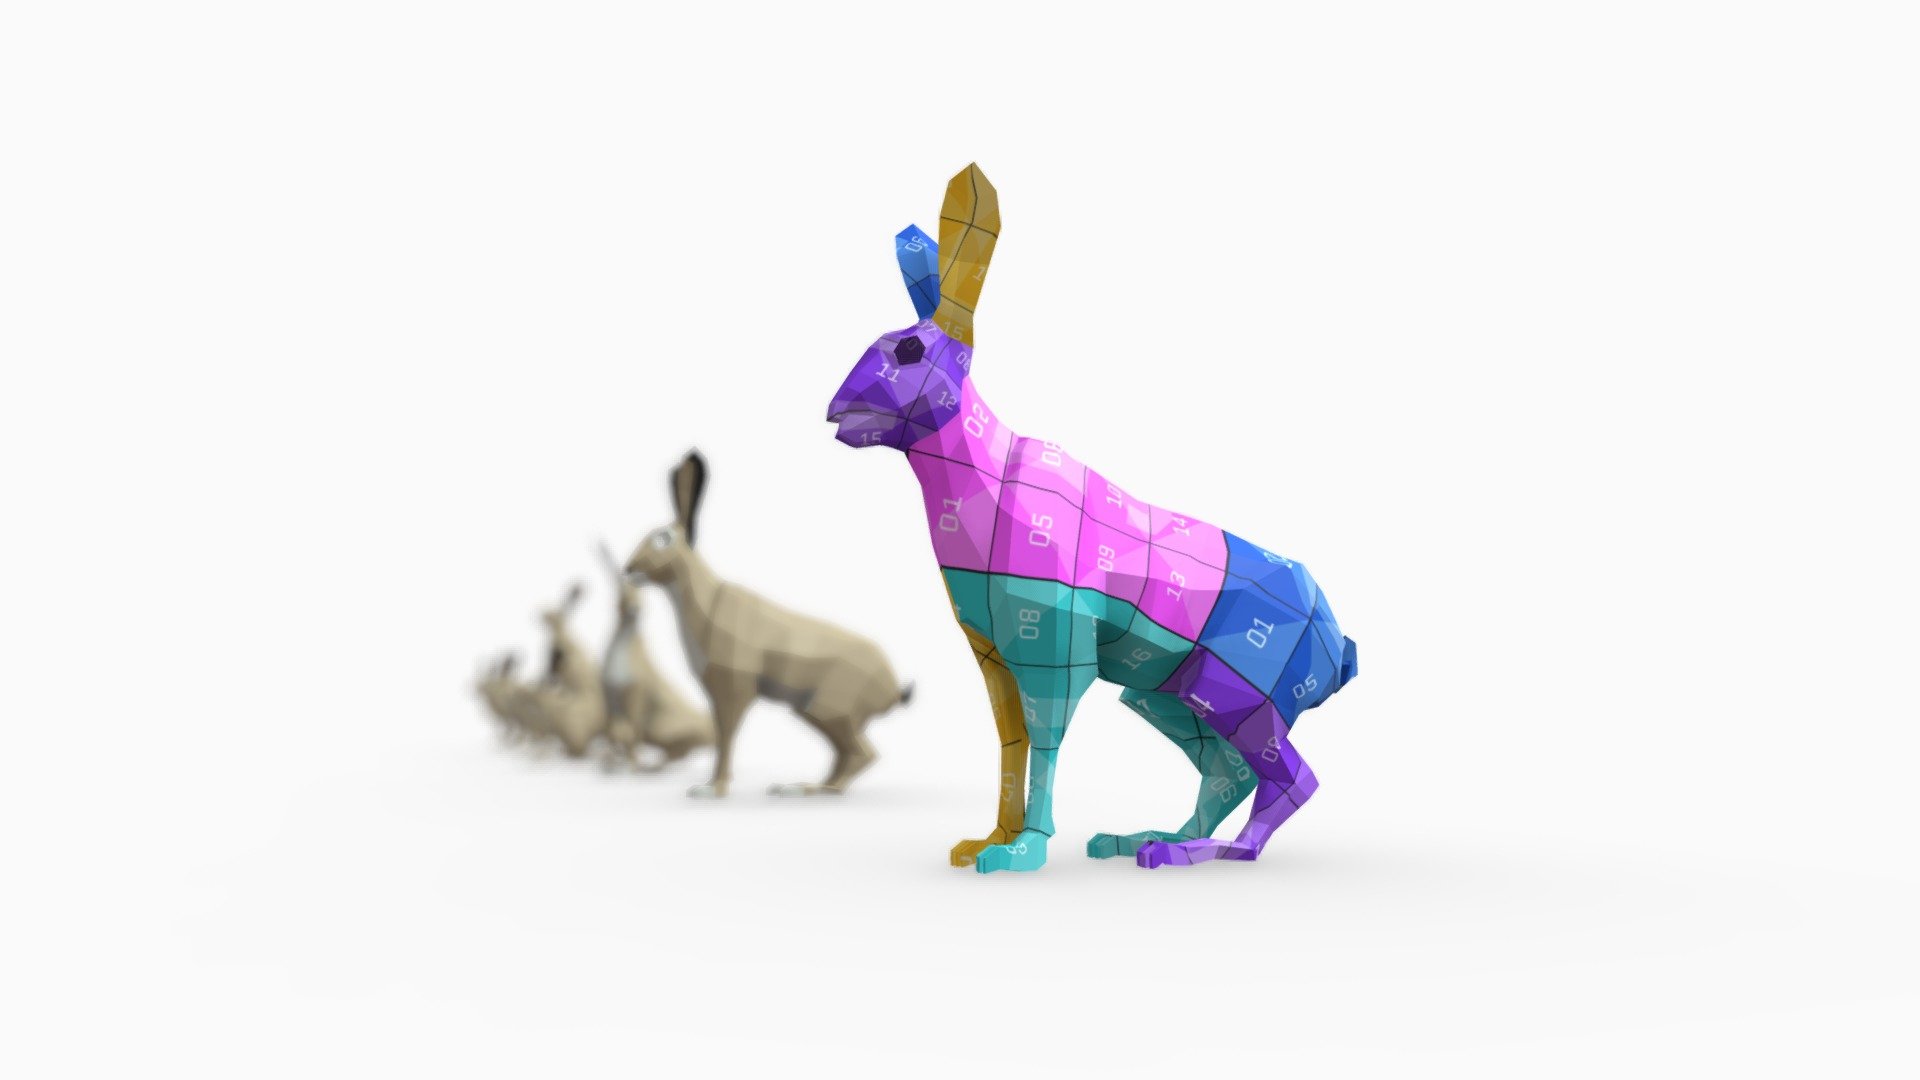 Verts 654 / Edges 1,302 / Faces 648 / Tris 1,296

Our original collection of lowpoly animals, all made with mainly quads and simplified meshes. The best meshes to get your scenes crowded and sculpting started. Great proportions with realistic shape and size.

•   Native file: Blender 2.79
•   Base Mesh: A quad face based in static pose and mapper texture.
•   Pack: A pack with 7 objects Rest + 6 poses.
•   UV Layout: that fits all of them.

Highly compatible with universal formats included in OBJ, FBX, DAE and 3DS


Created with Blender and exported to all other formats.
Some orientations might vary because of export.
At least 95% quads, sometimes even 100%.
Rest pose included, completely symmetrical and ready to rig.
Real world scales to put together and see real sizes.
 - Rabbit - Buy Royalty Free 3D model by Studio Ochi (@studioochi) 3d model